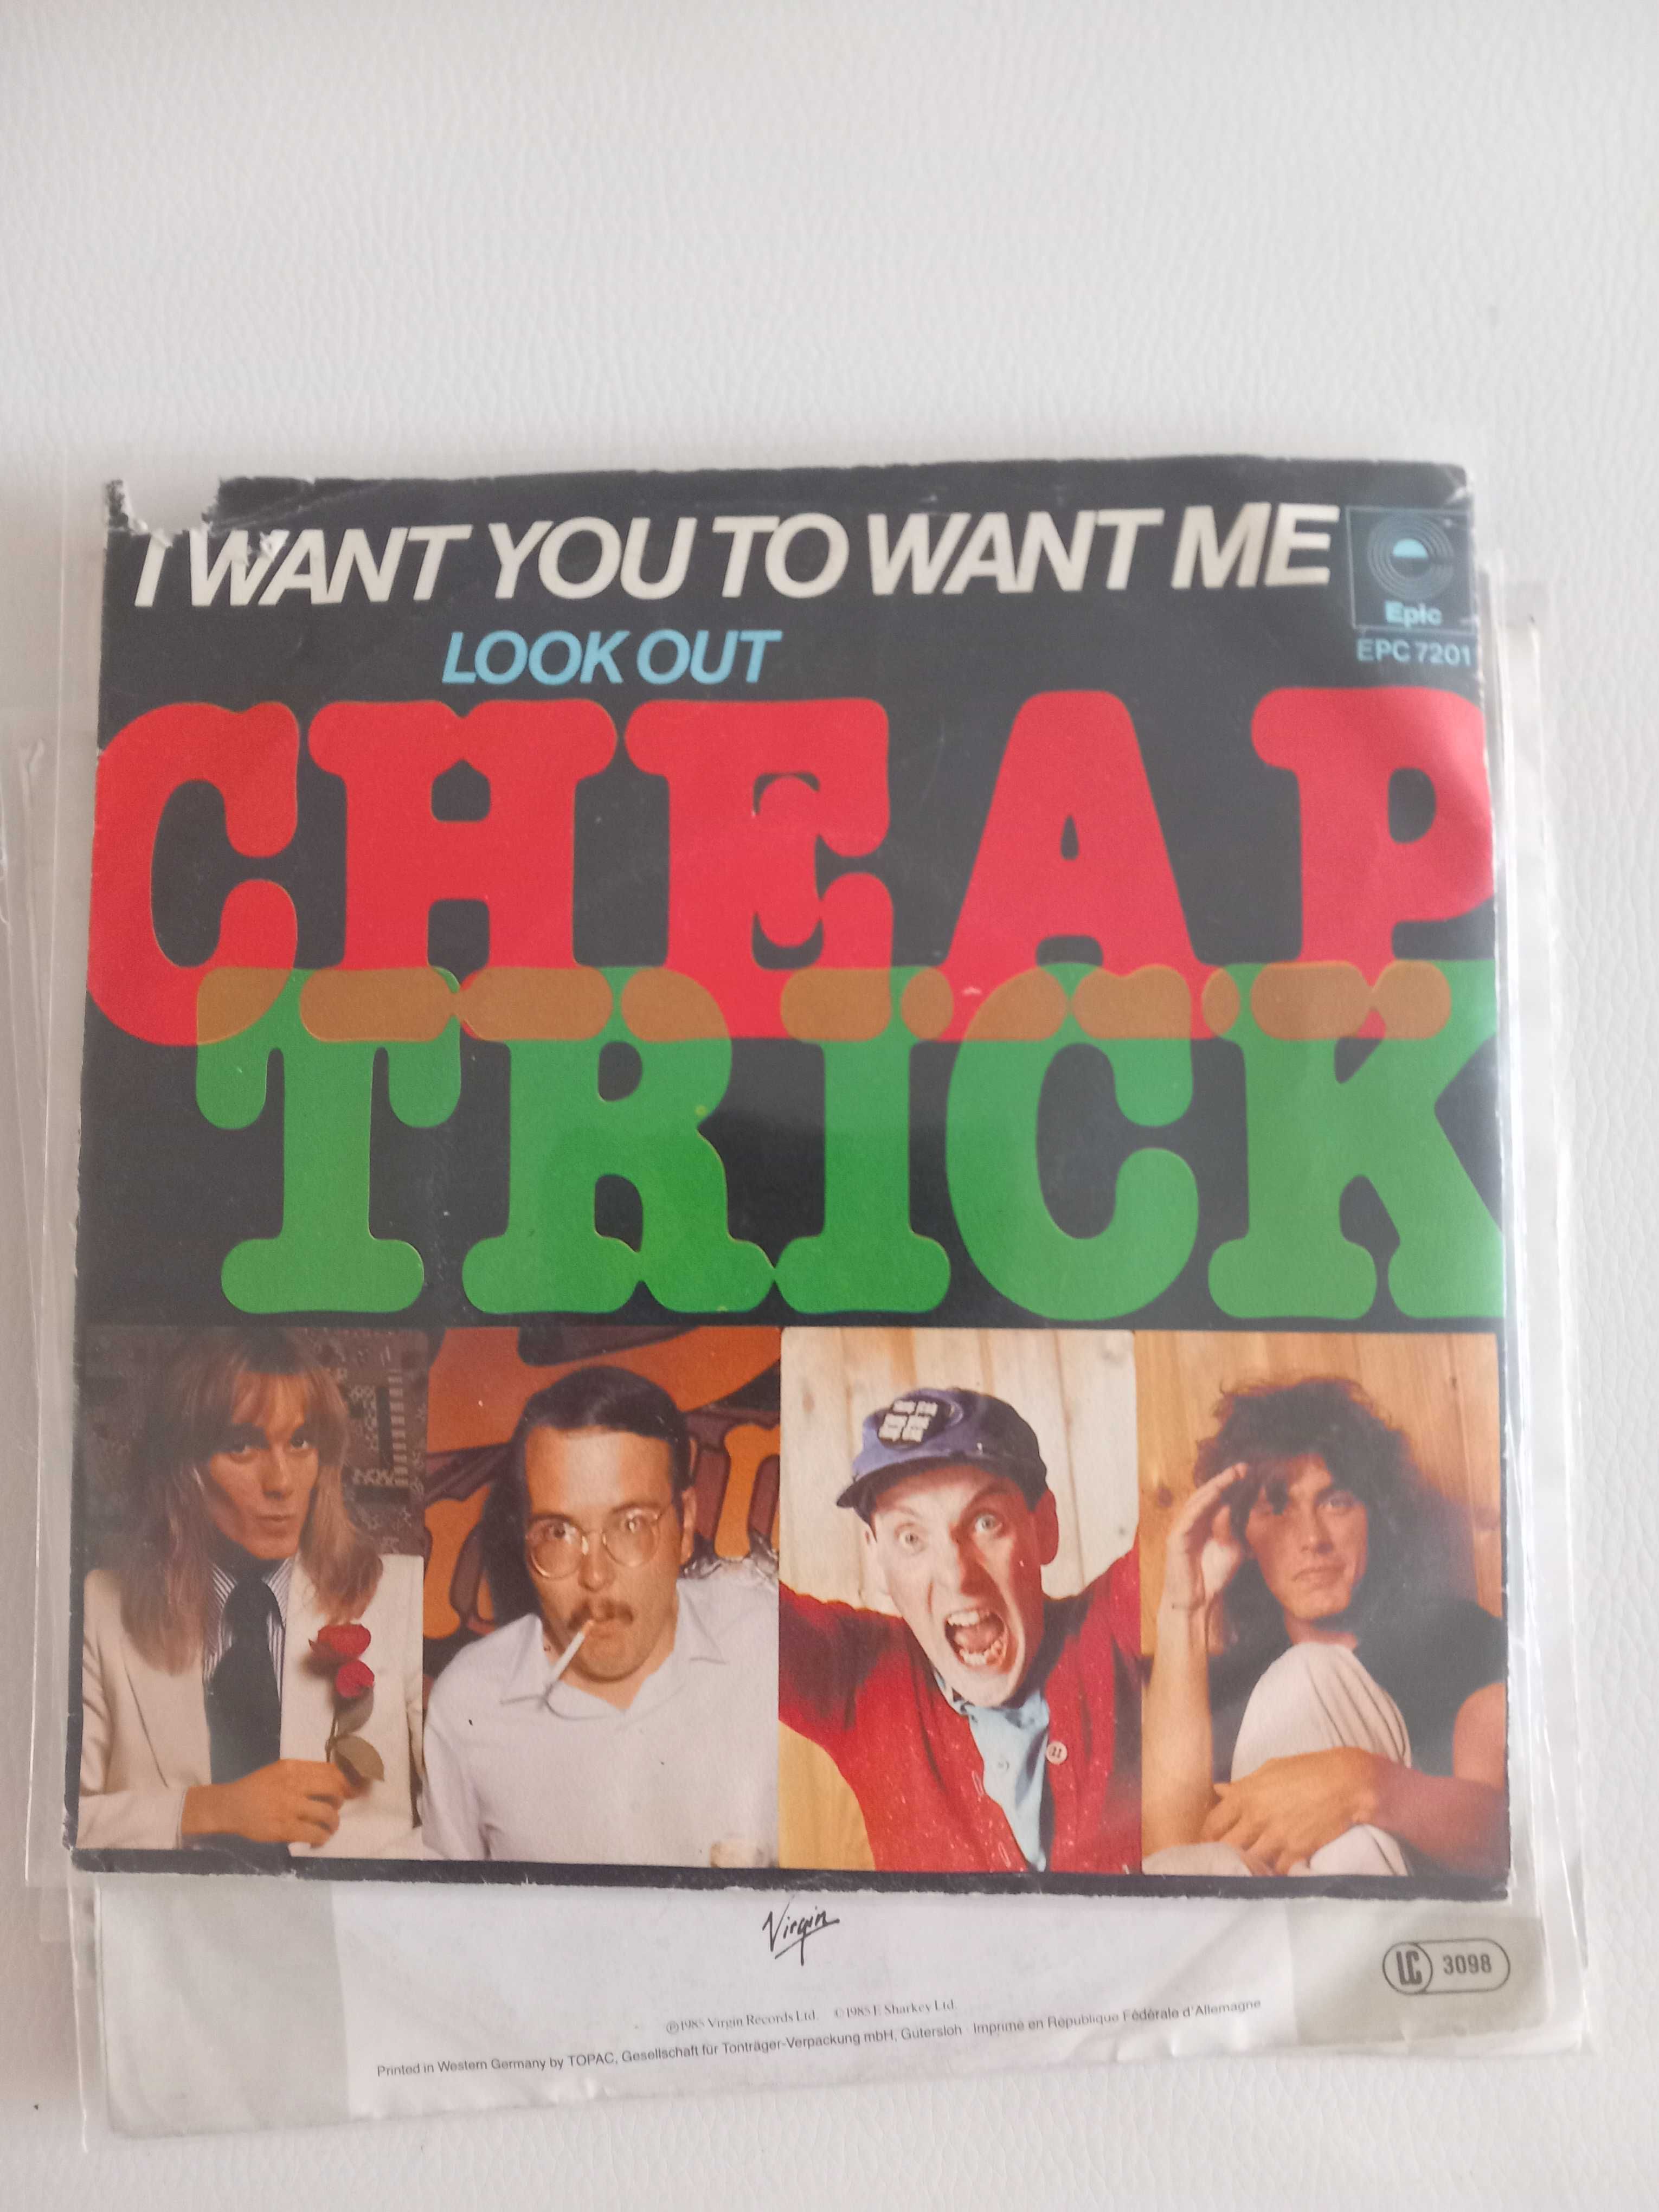 Cheap Trick - i want you to want me / look out - singiel